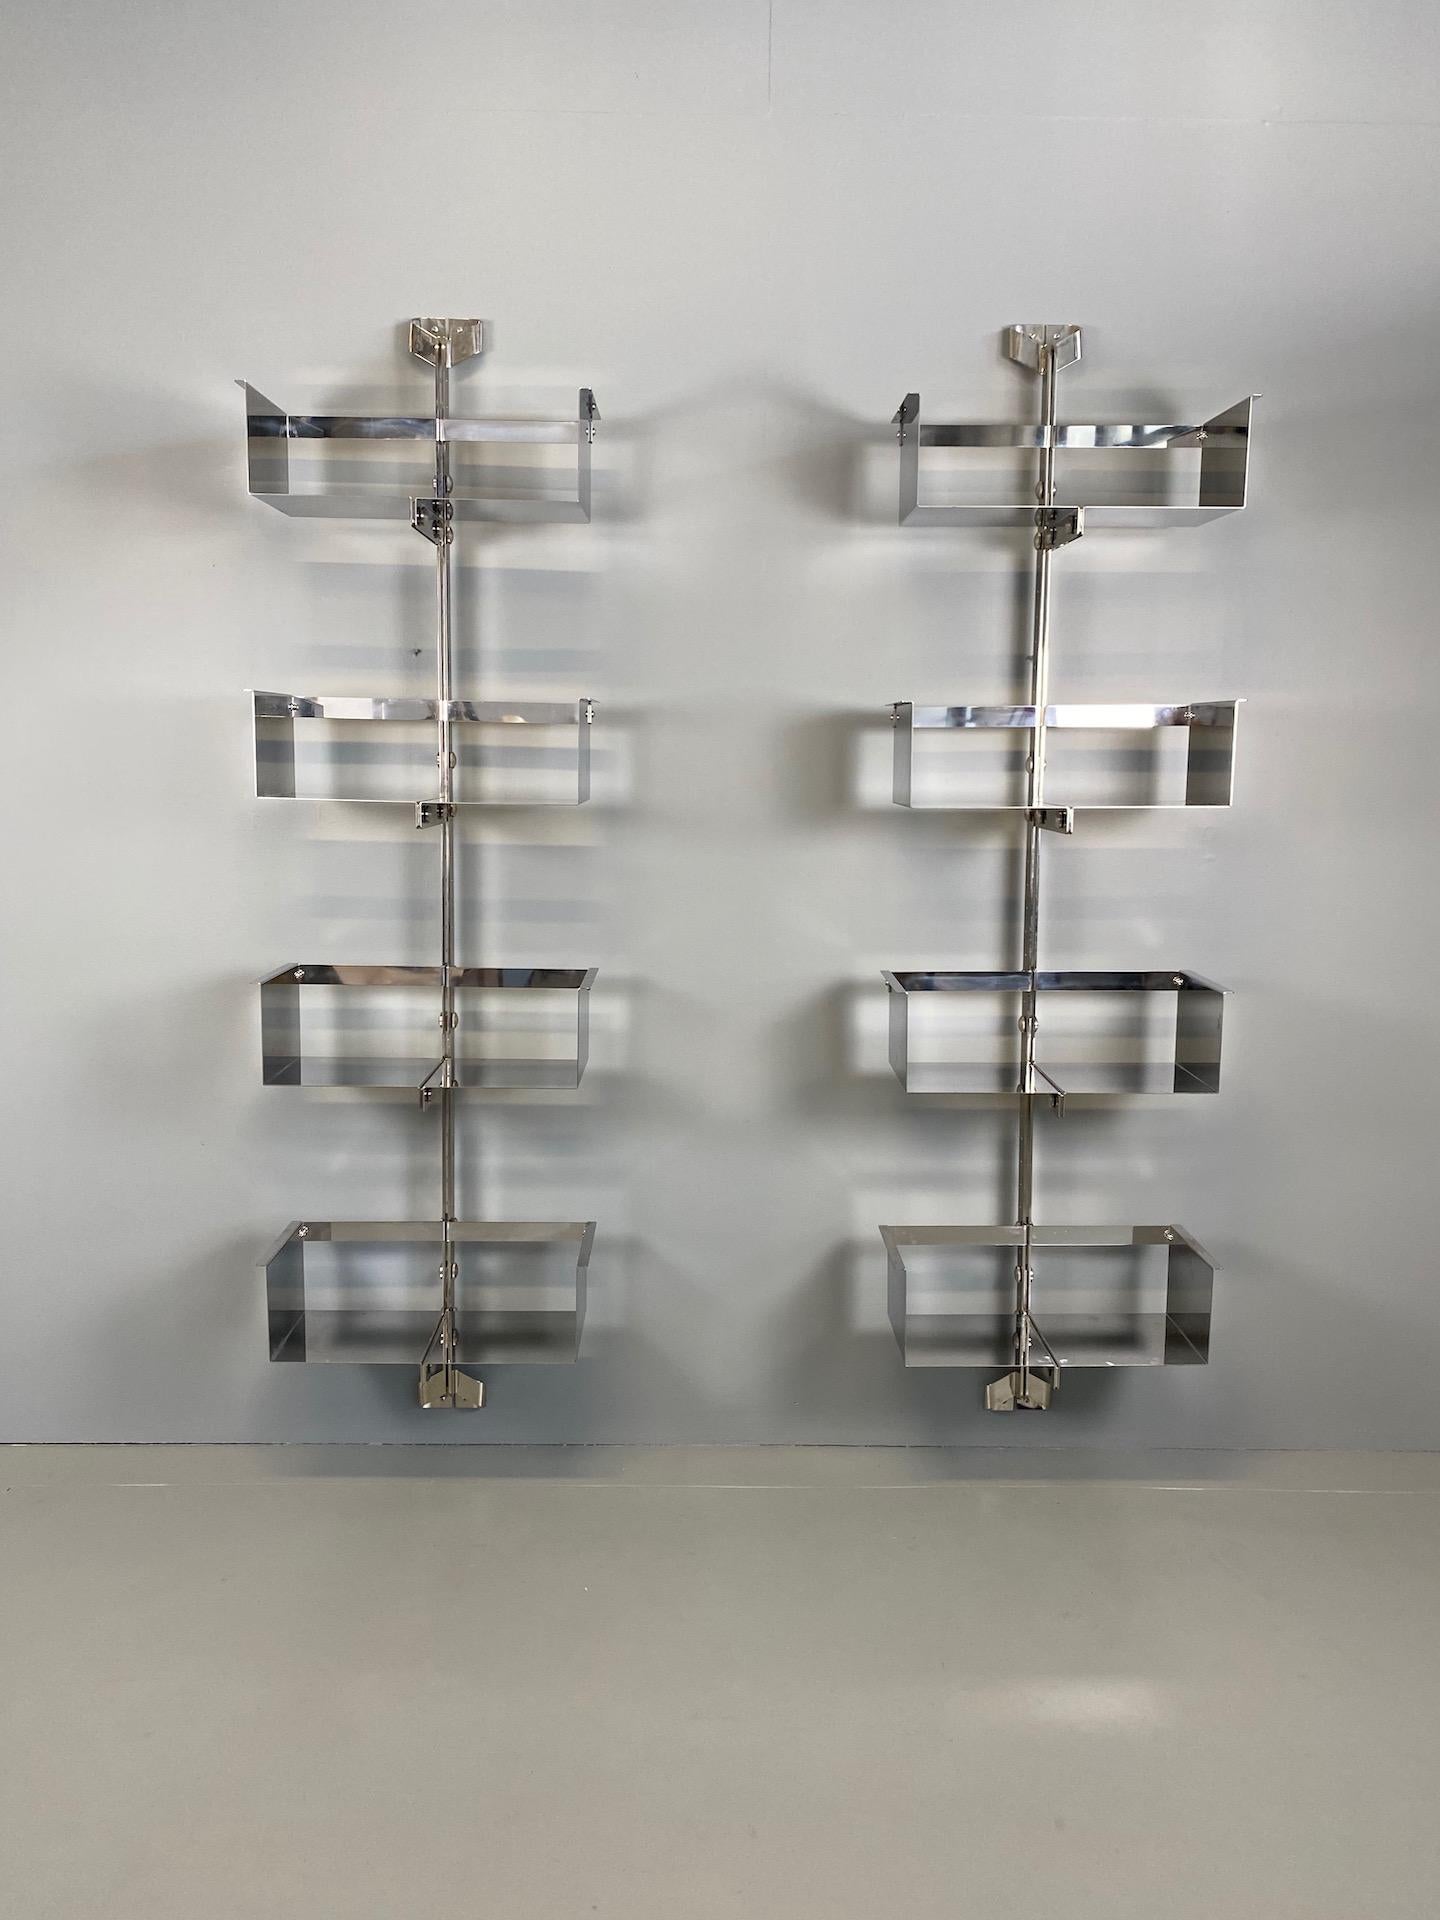 Pair of modular wall-mounted shelving system designed by Vittorio Introini, produced by Saporiti, Italy, circa 1969. Whit original label. Stainless steel, very good condition. Shelves can be used individually or combined together in many different